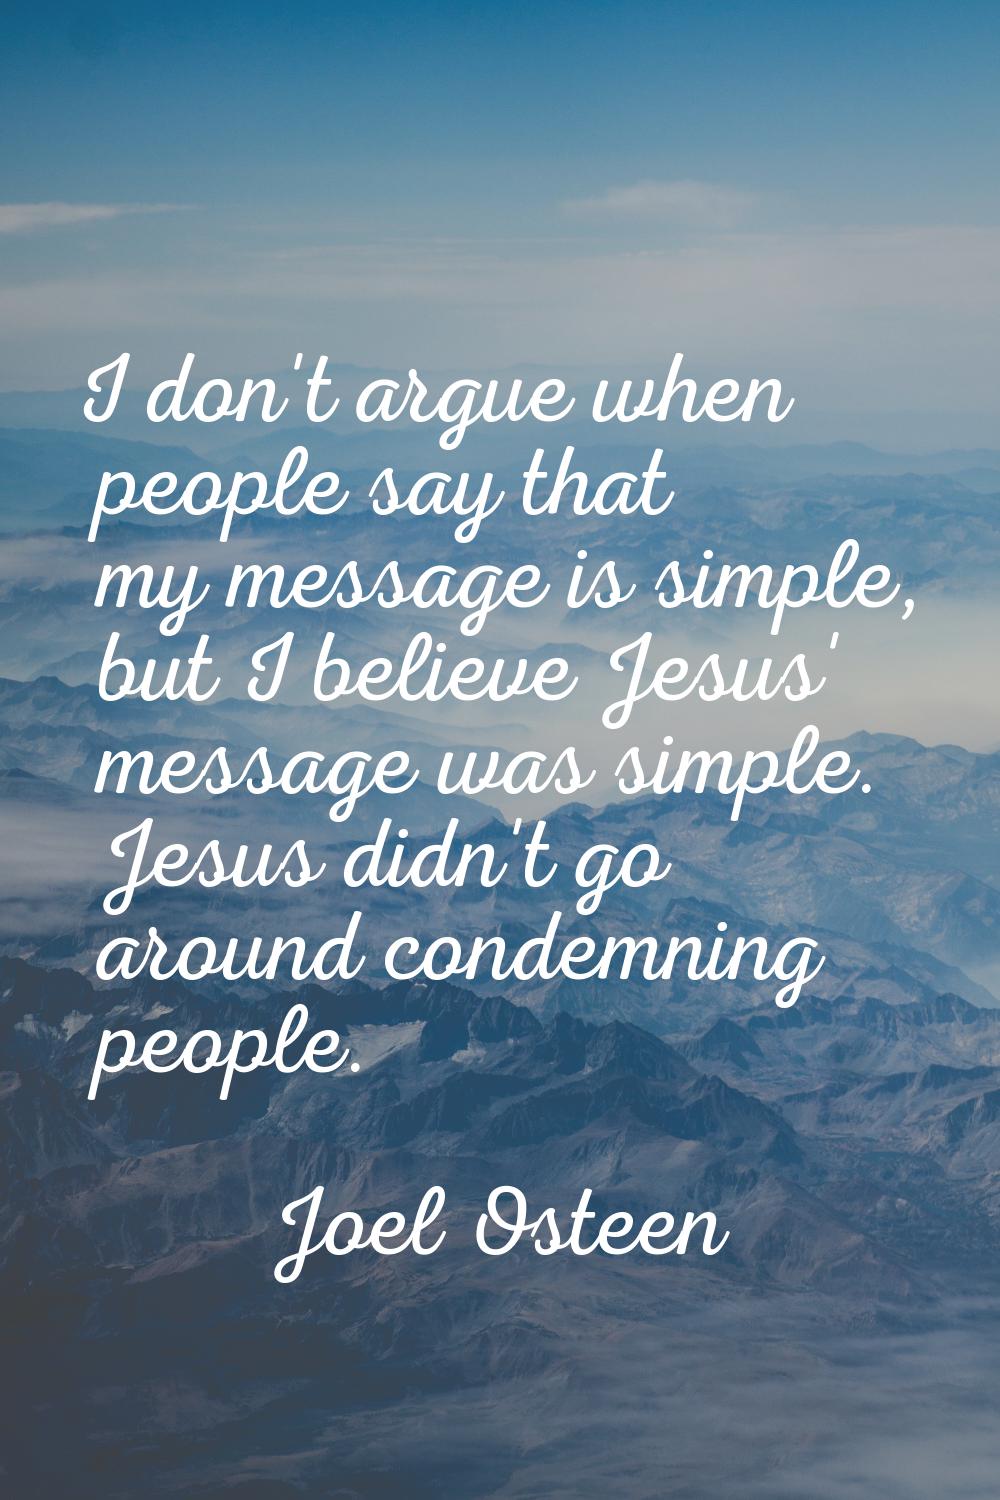 I don't argue when people say that my message is simple, but I believe Jesus' message was simple. J